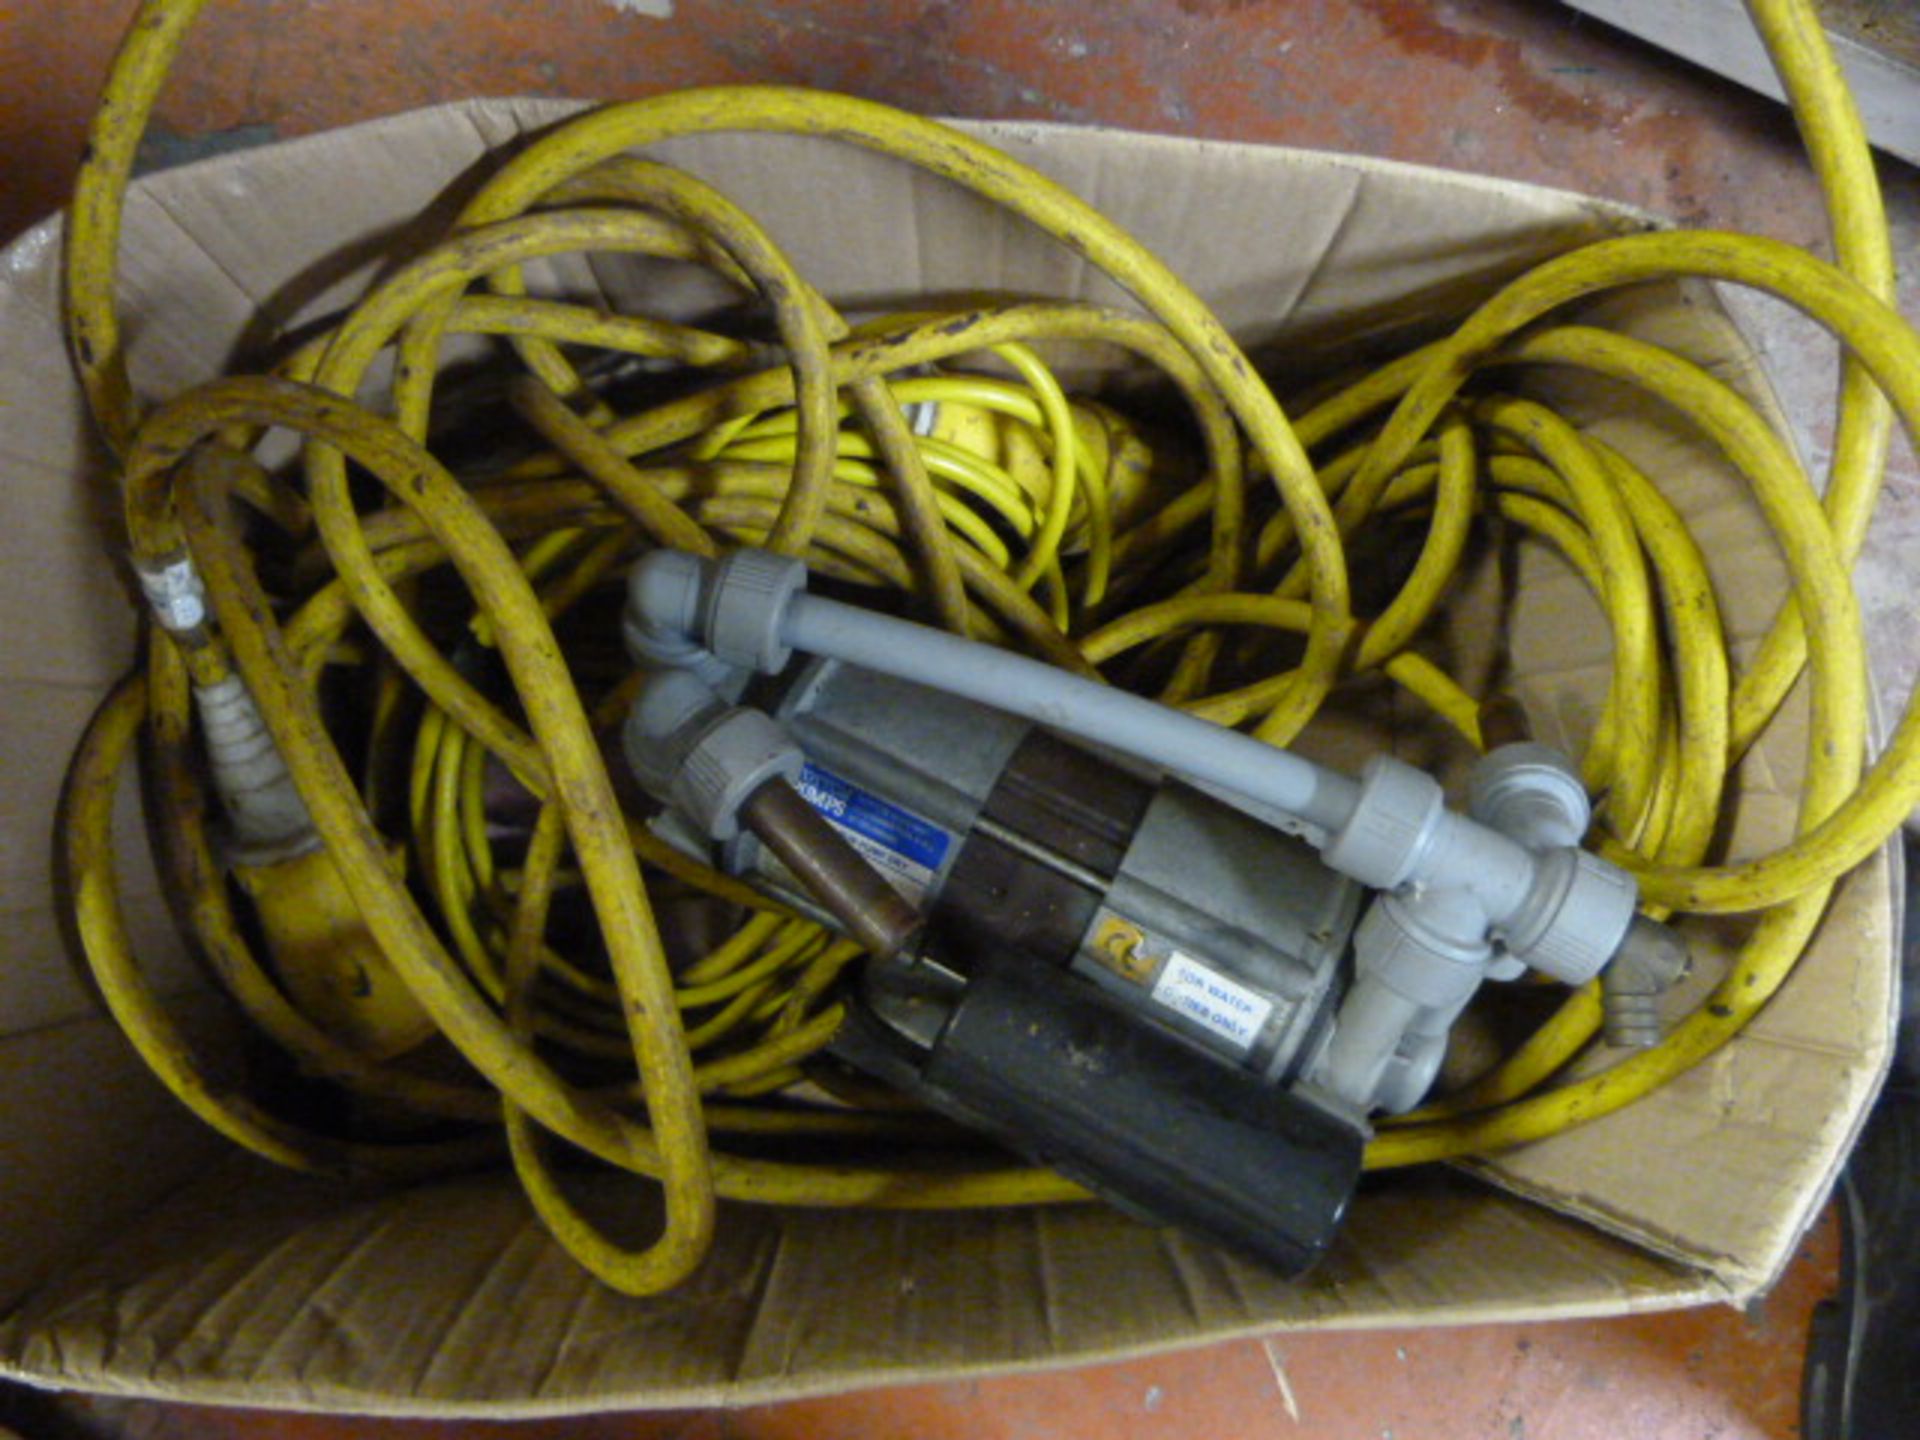 *Water Pump and a Length of Industrial Cable